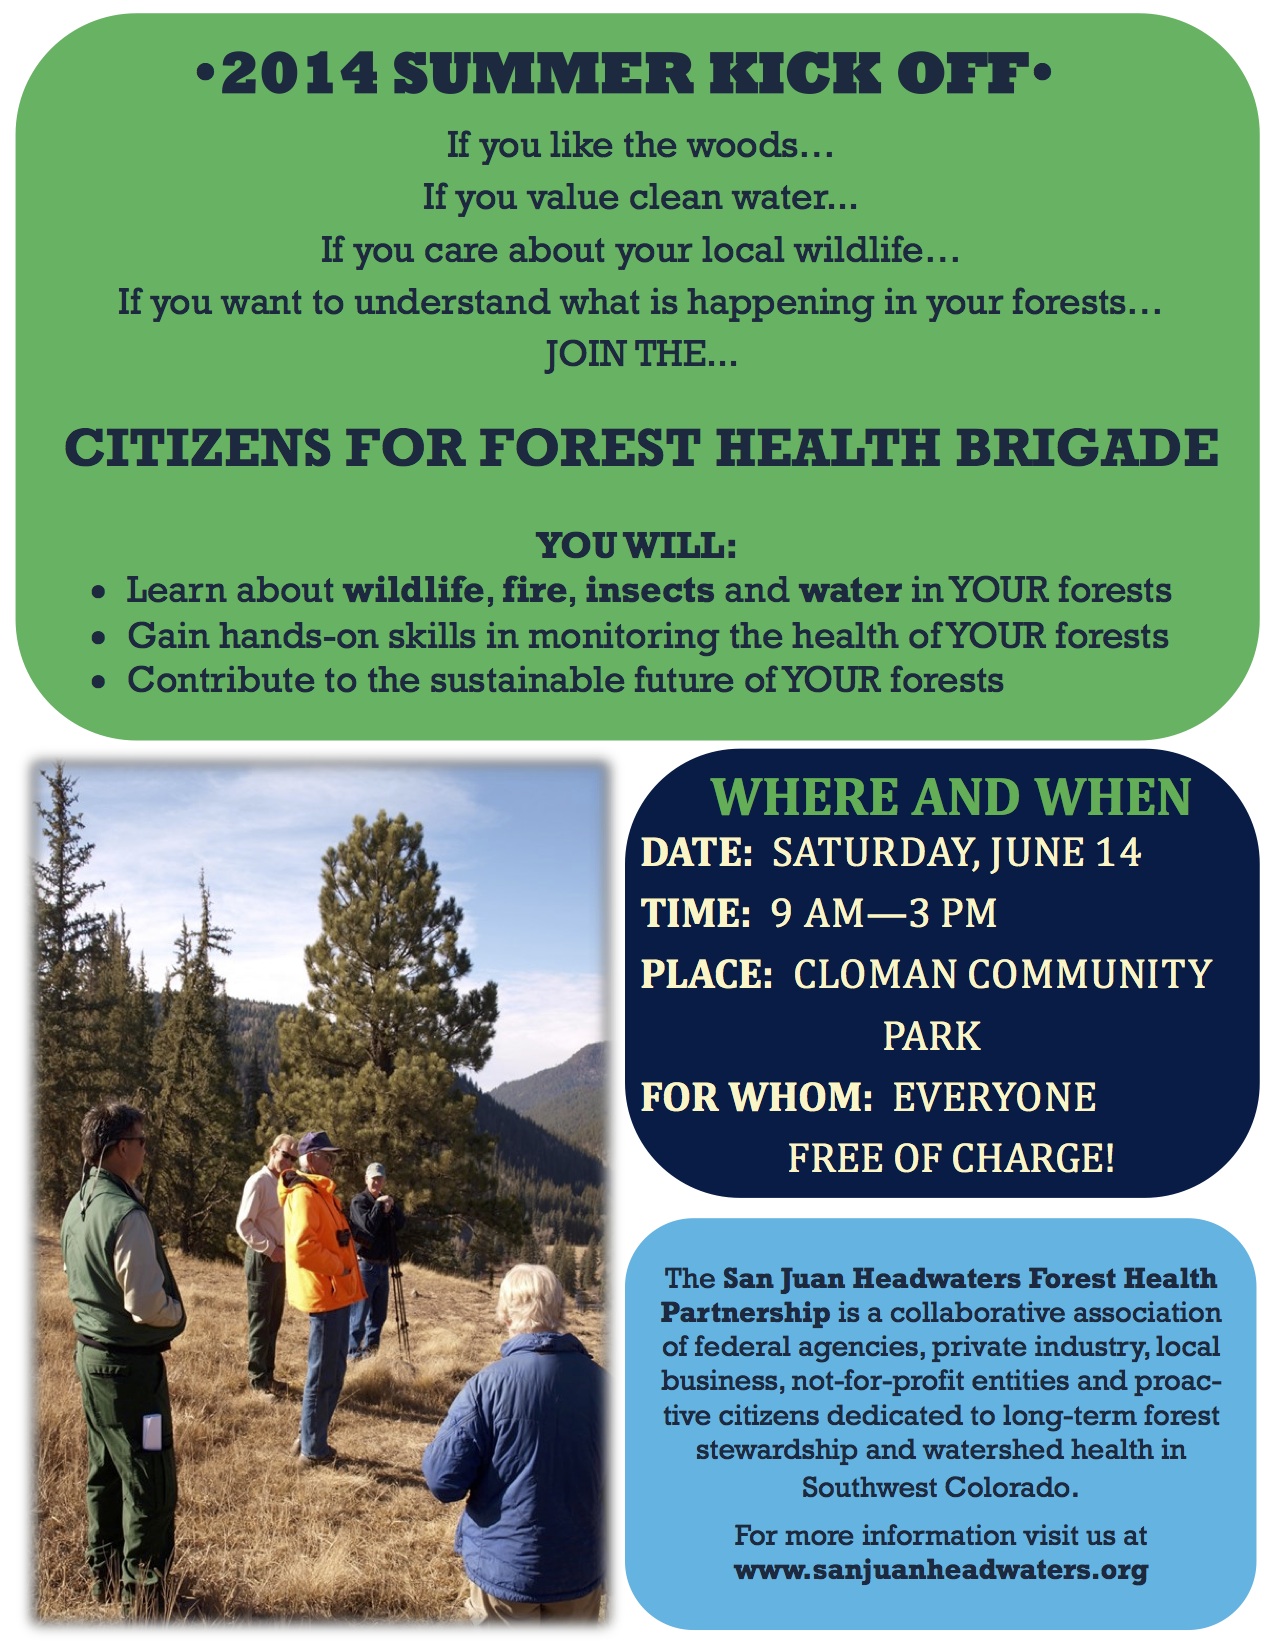 Citizen Science: Forest Health and Wildlife – June 14, 9:00am to 3:00pm